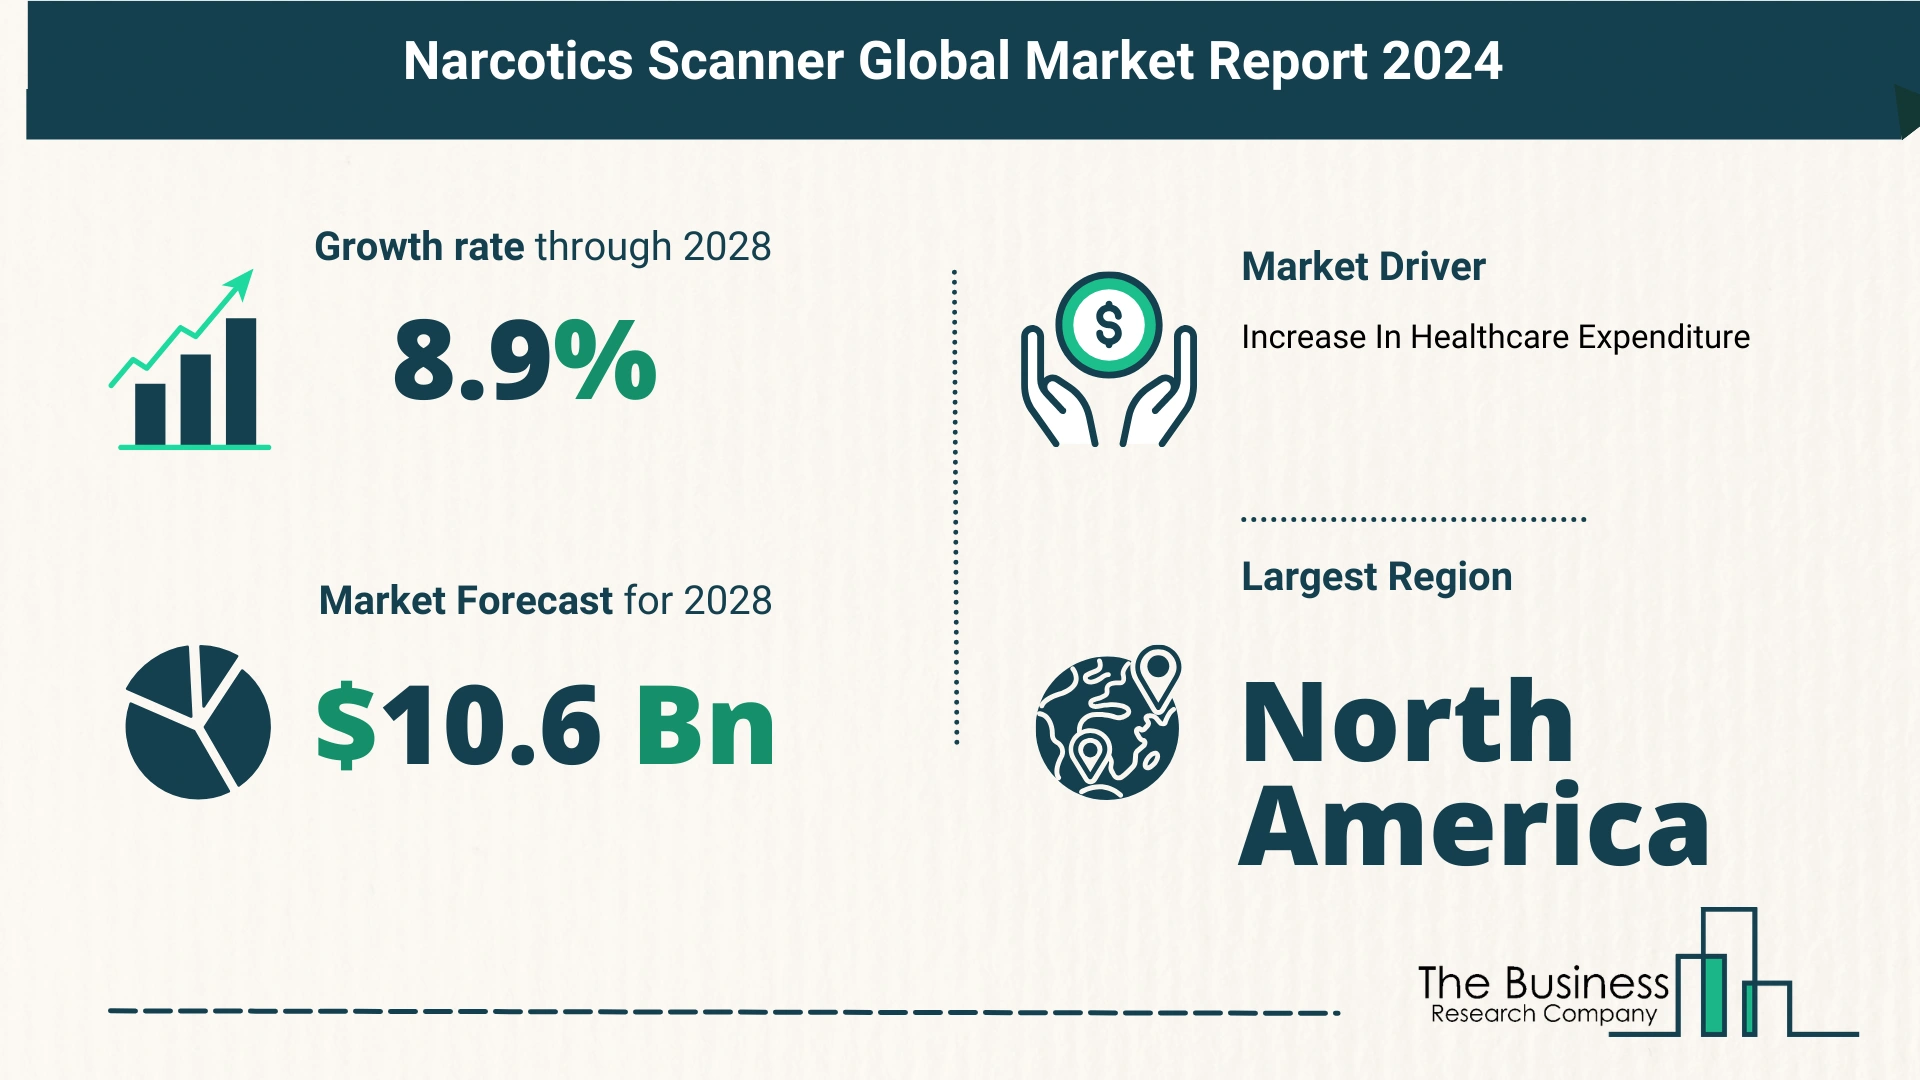 Global Narcotics Scanner Market Analysis: Estimated Market Size And Growth Rate